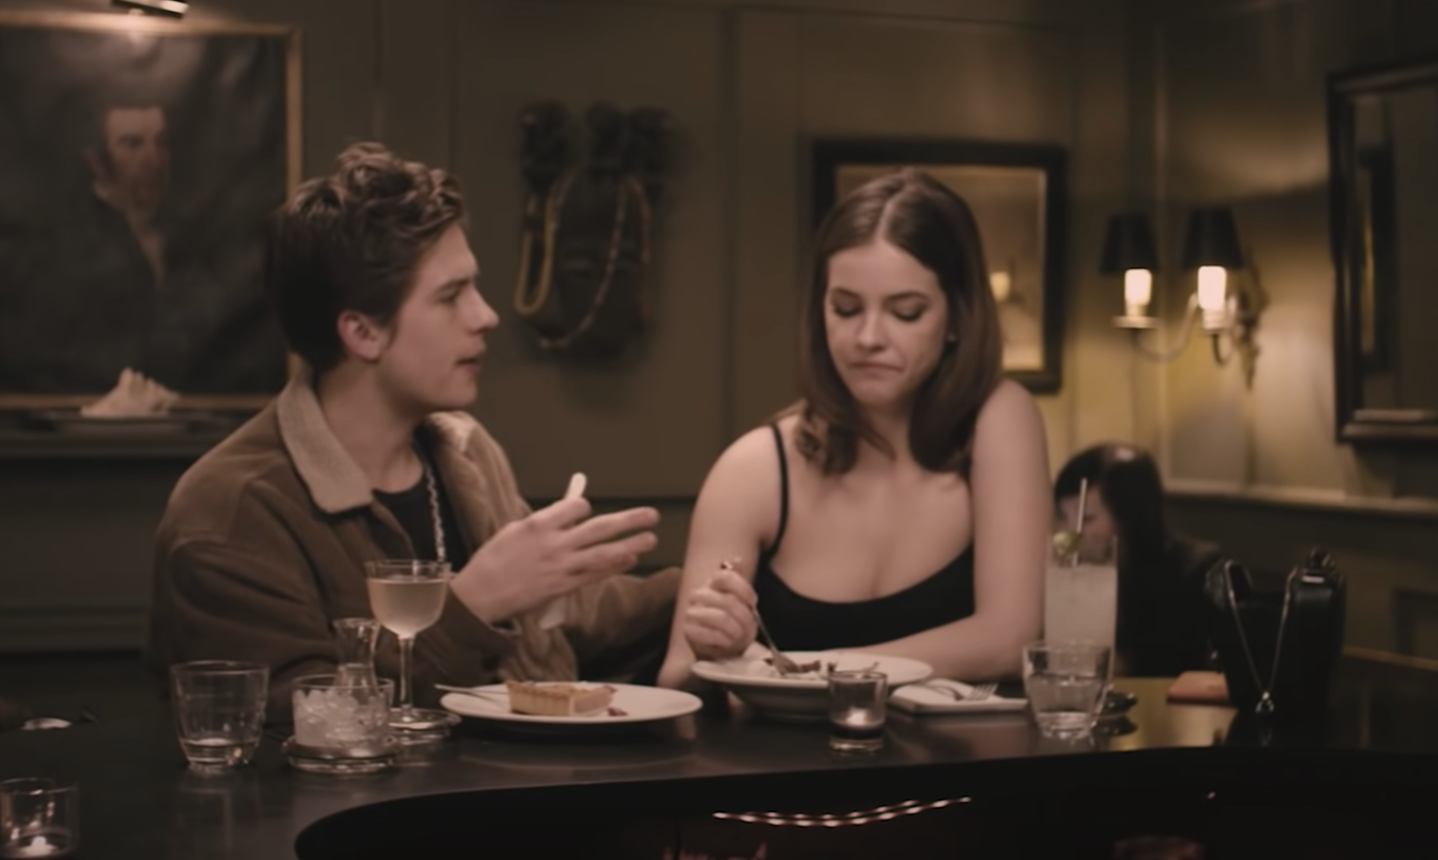 Dylan Sprouse and Barbara Palvin eating dinner